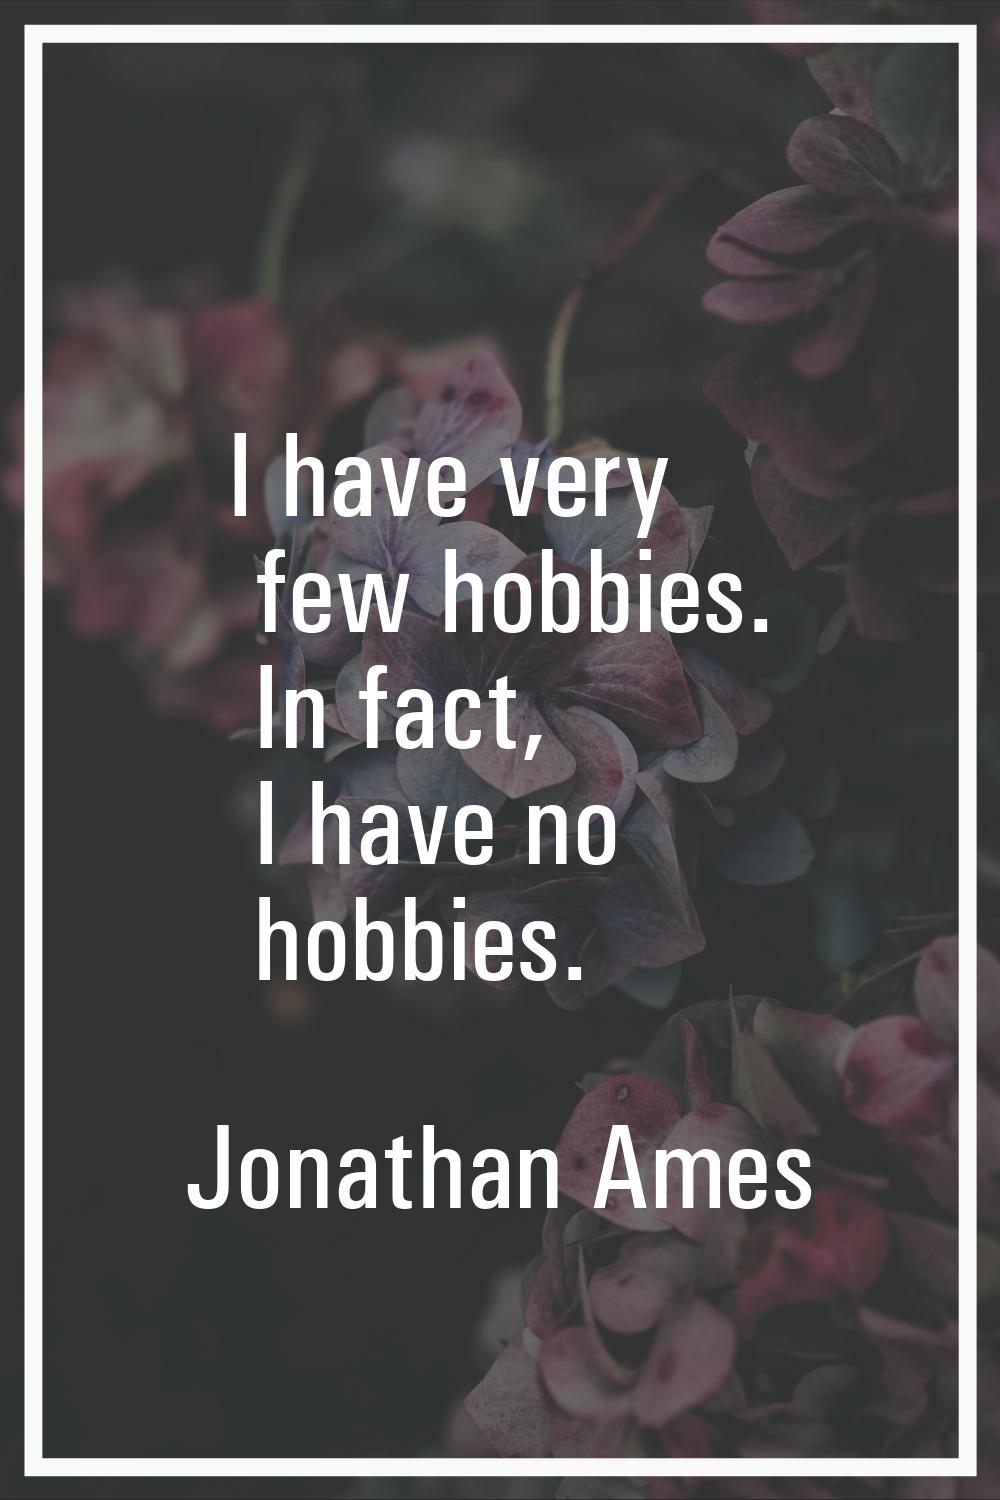 I have very few hobbies. In fact, I have no hobbies.